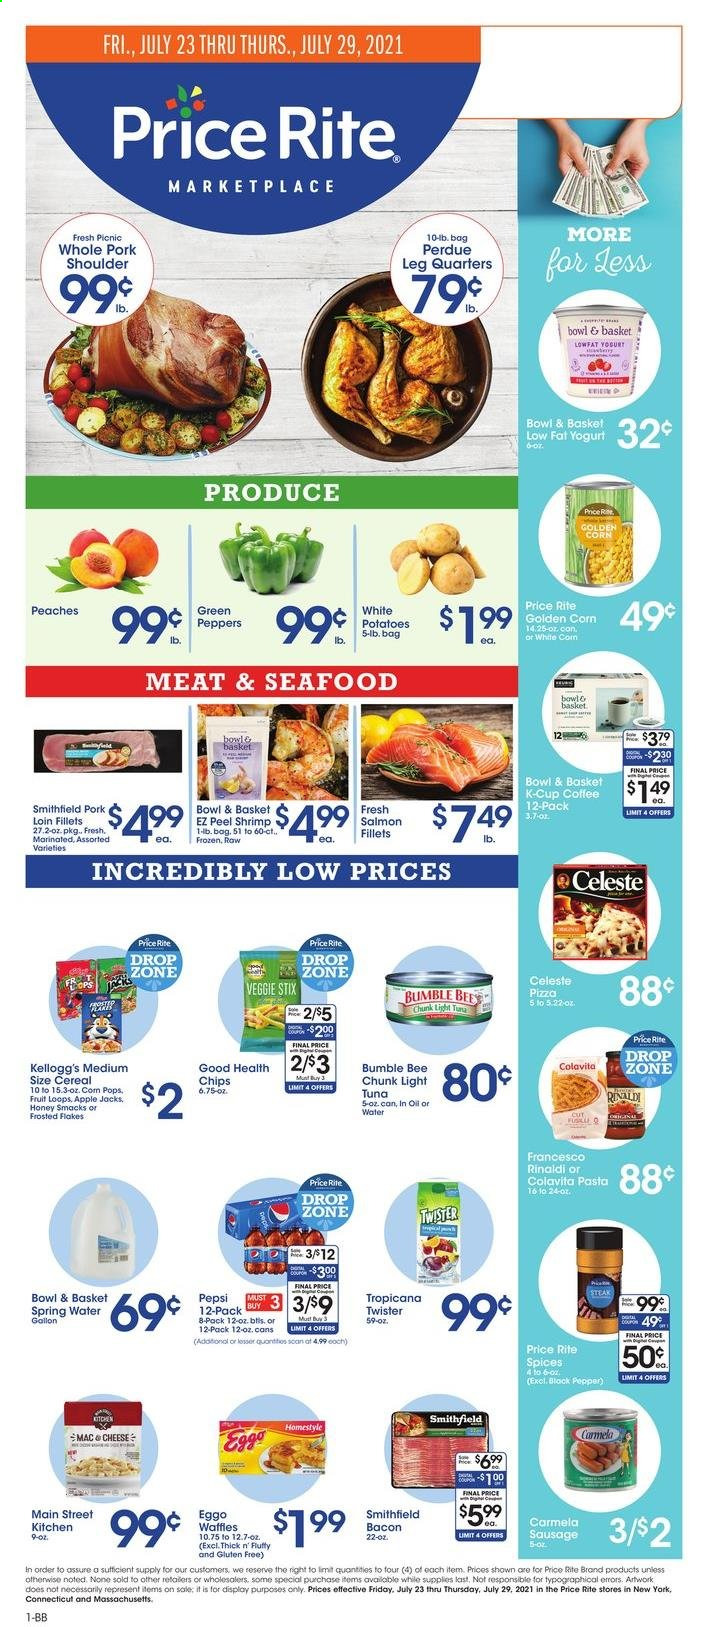 thumbnail - Price Rite Flyer - 07/23/2021 - 07/29/2021 - Sales products - Bowl & Basket, waffles, corn, potatoes, peppers, salmon, tuna, seafood, shrimps, pizza, pasta, Bumble Bee, Perdue®, bacon, sausage, yoghurt, Celeste, Kellogg's, light tuna, corned meat, Carmela, cereals, Frosted Flakes, honey, Pepsi, Tropicana Twister, spring water, coffee, coffee capsules, K-Cups, red wine, wine, pork loin, pork meat, gallon, peaches. Page 1.